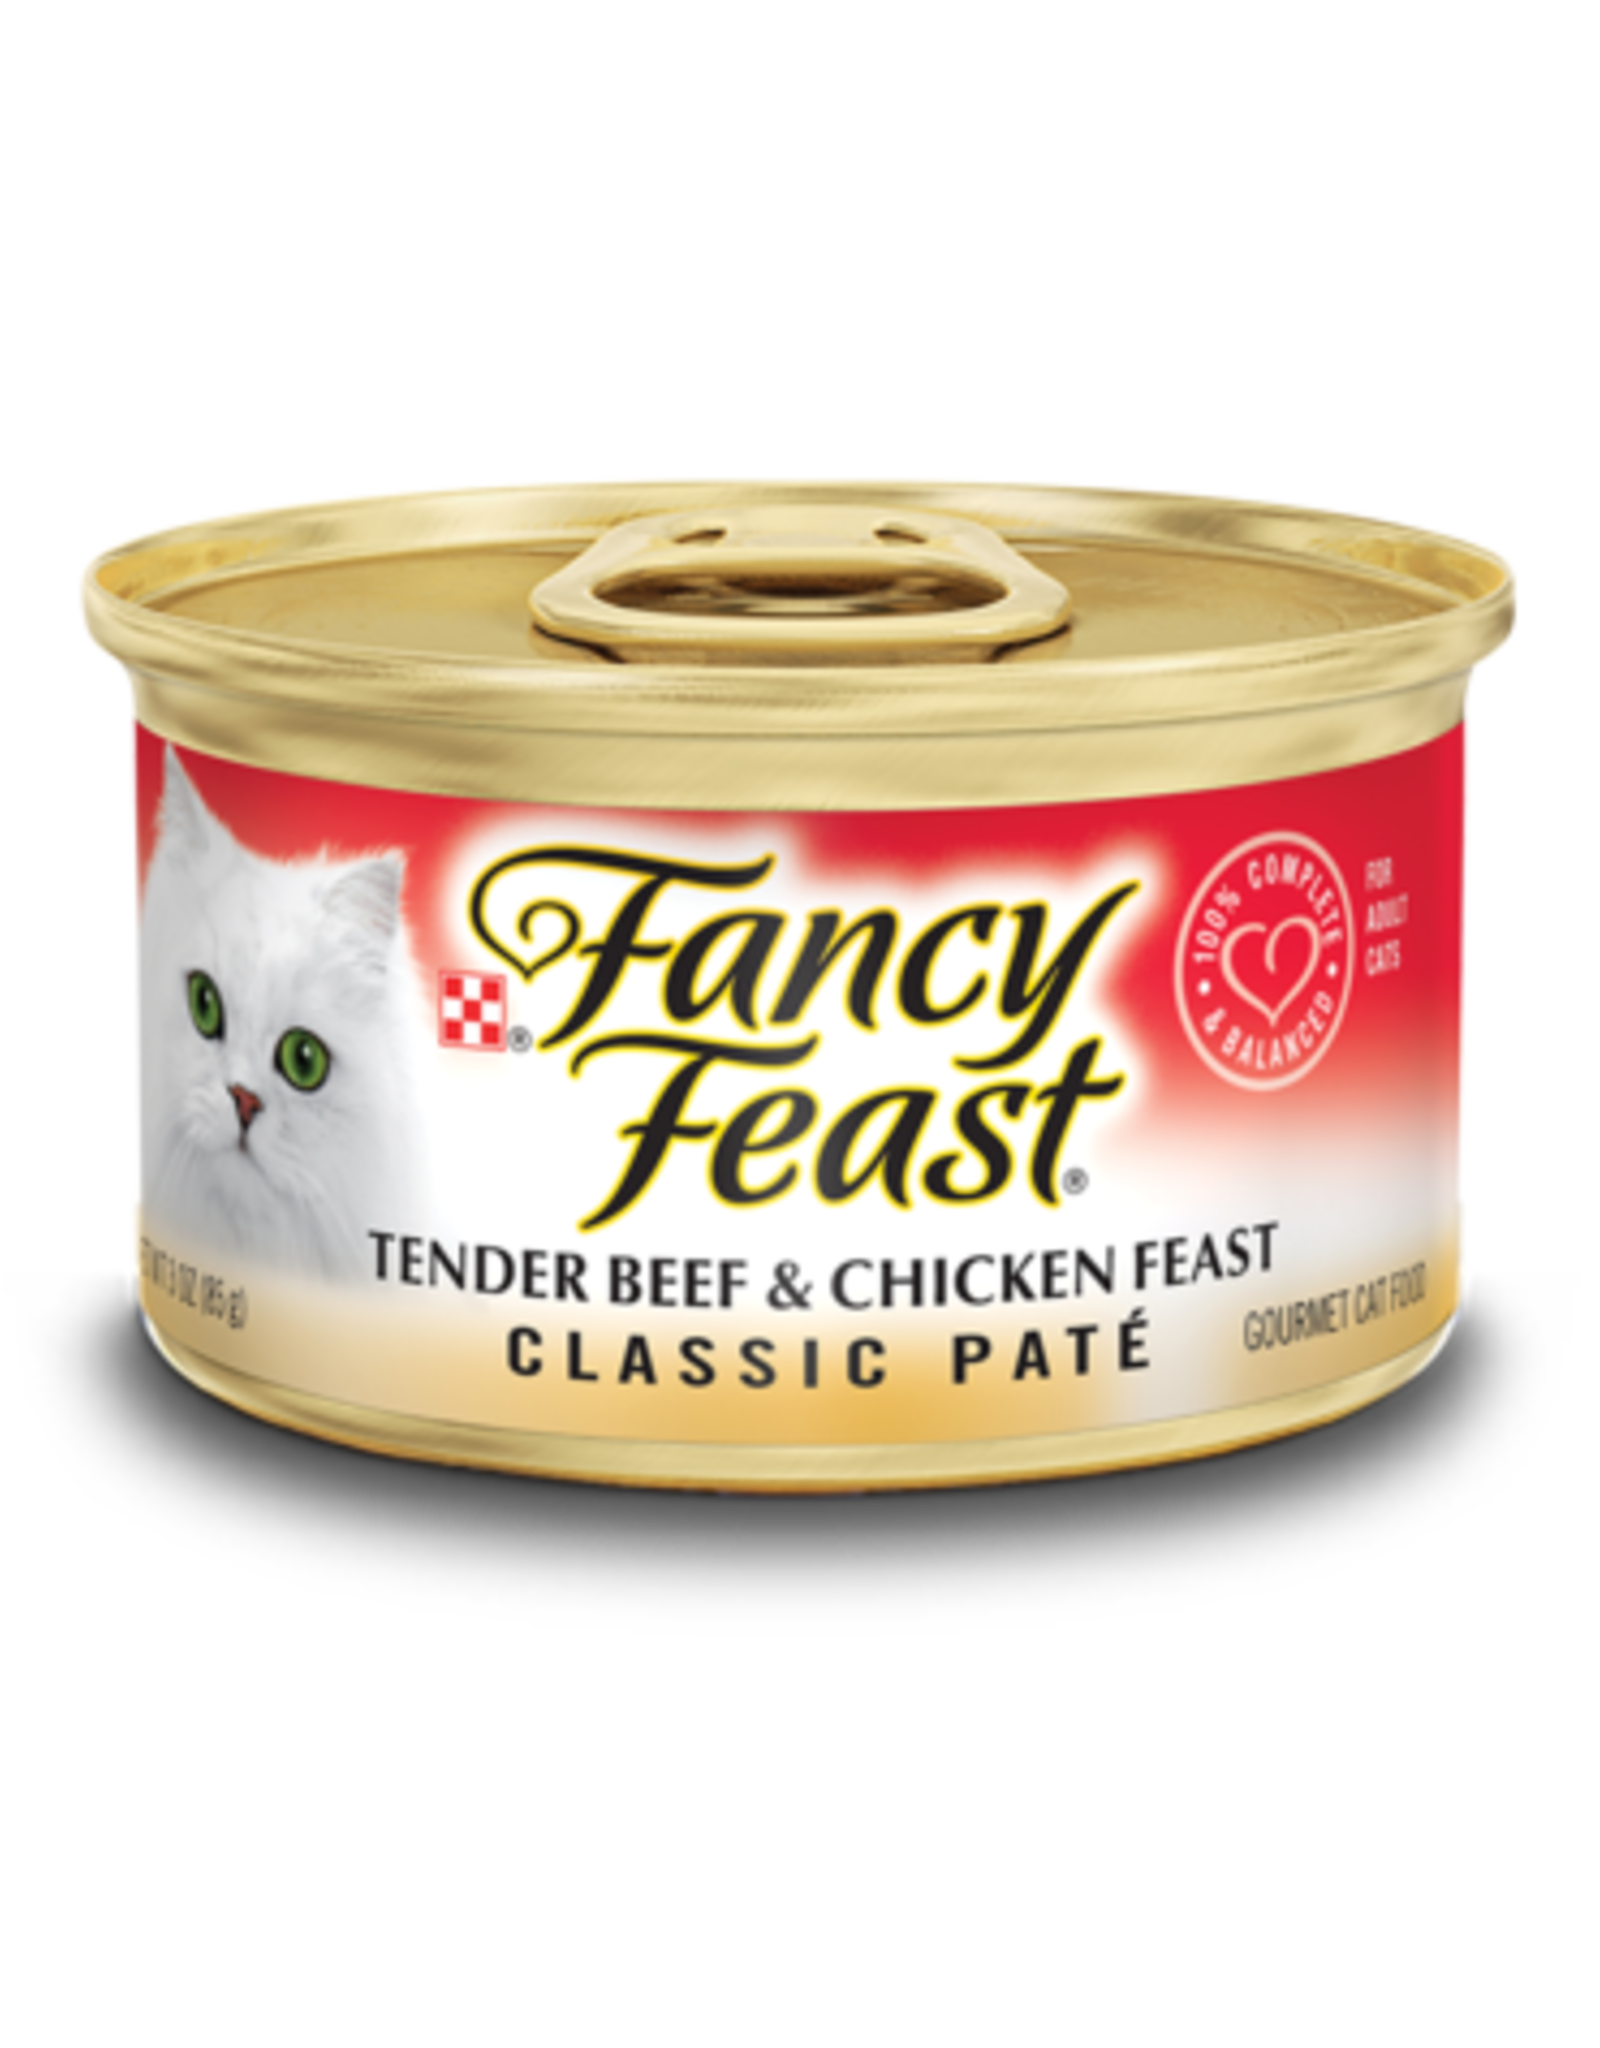 NESTLE PURINA PETCARE FANCY FEAST CLASSIC BEEF & CHICKEN 3OZ CASE OF 24